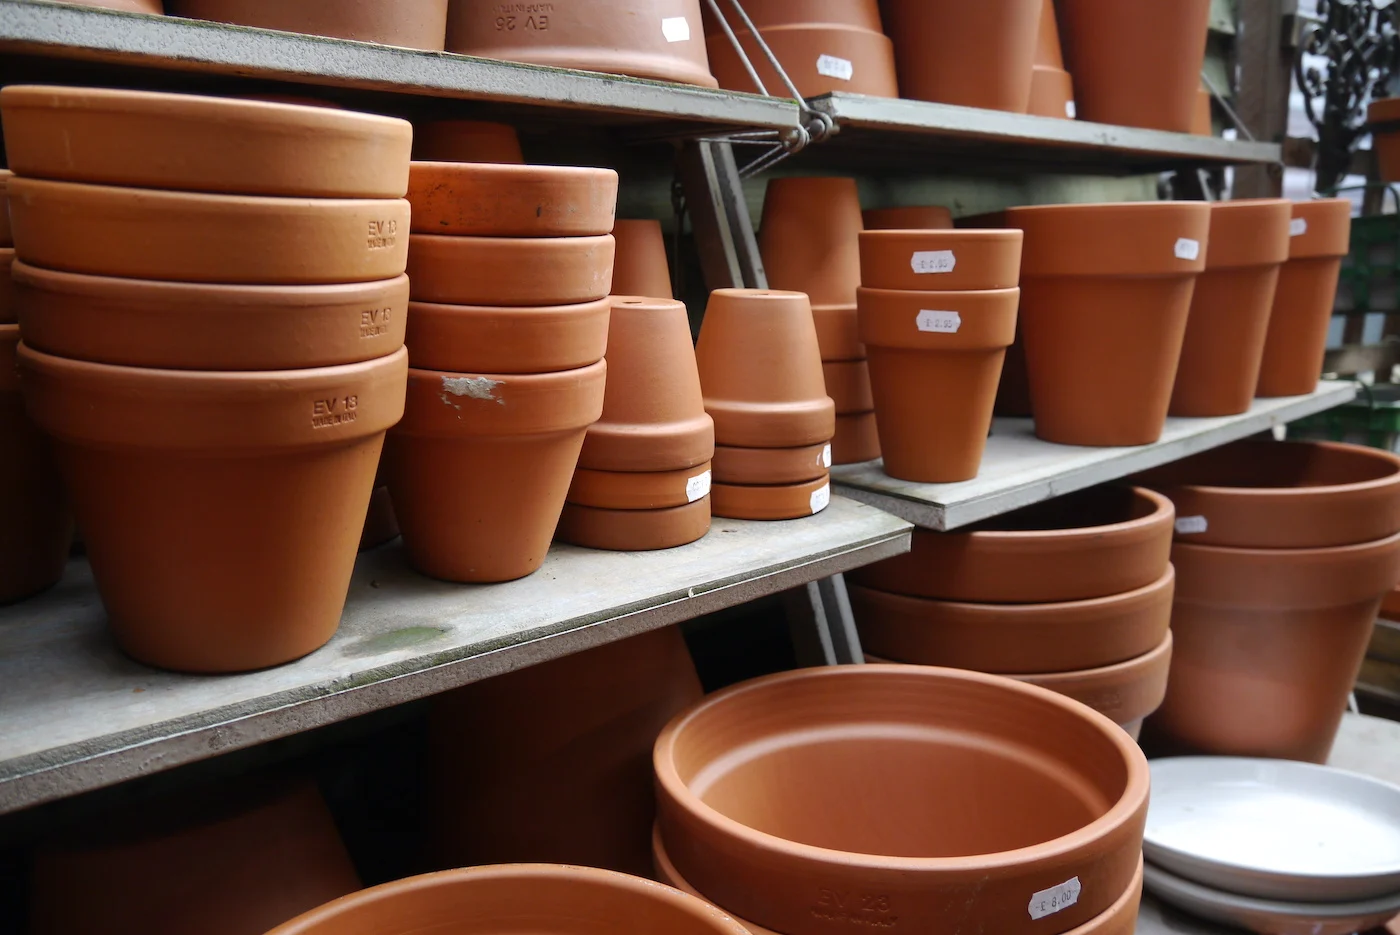 Collection of clay pots